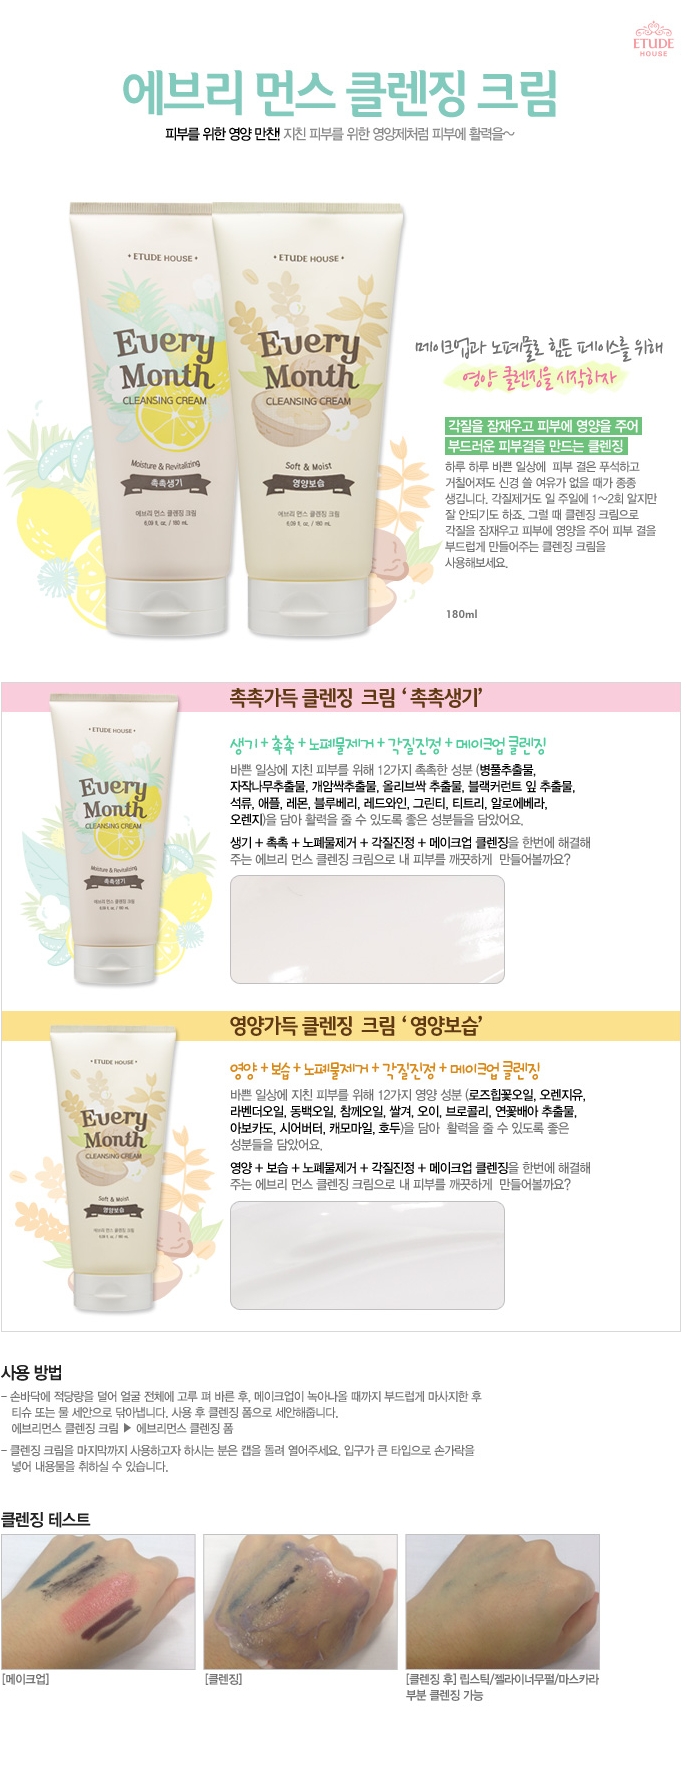 Every Month Cleansing Cream